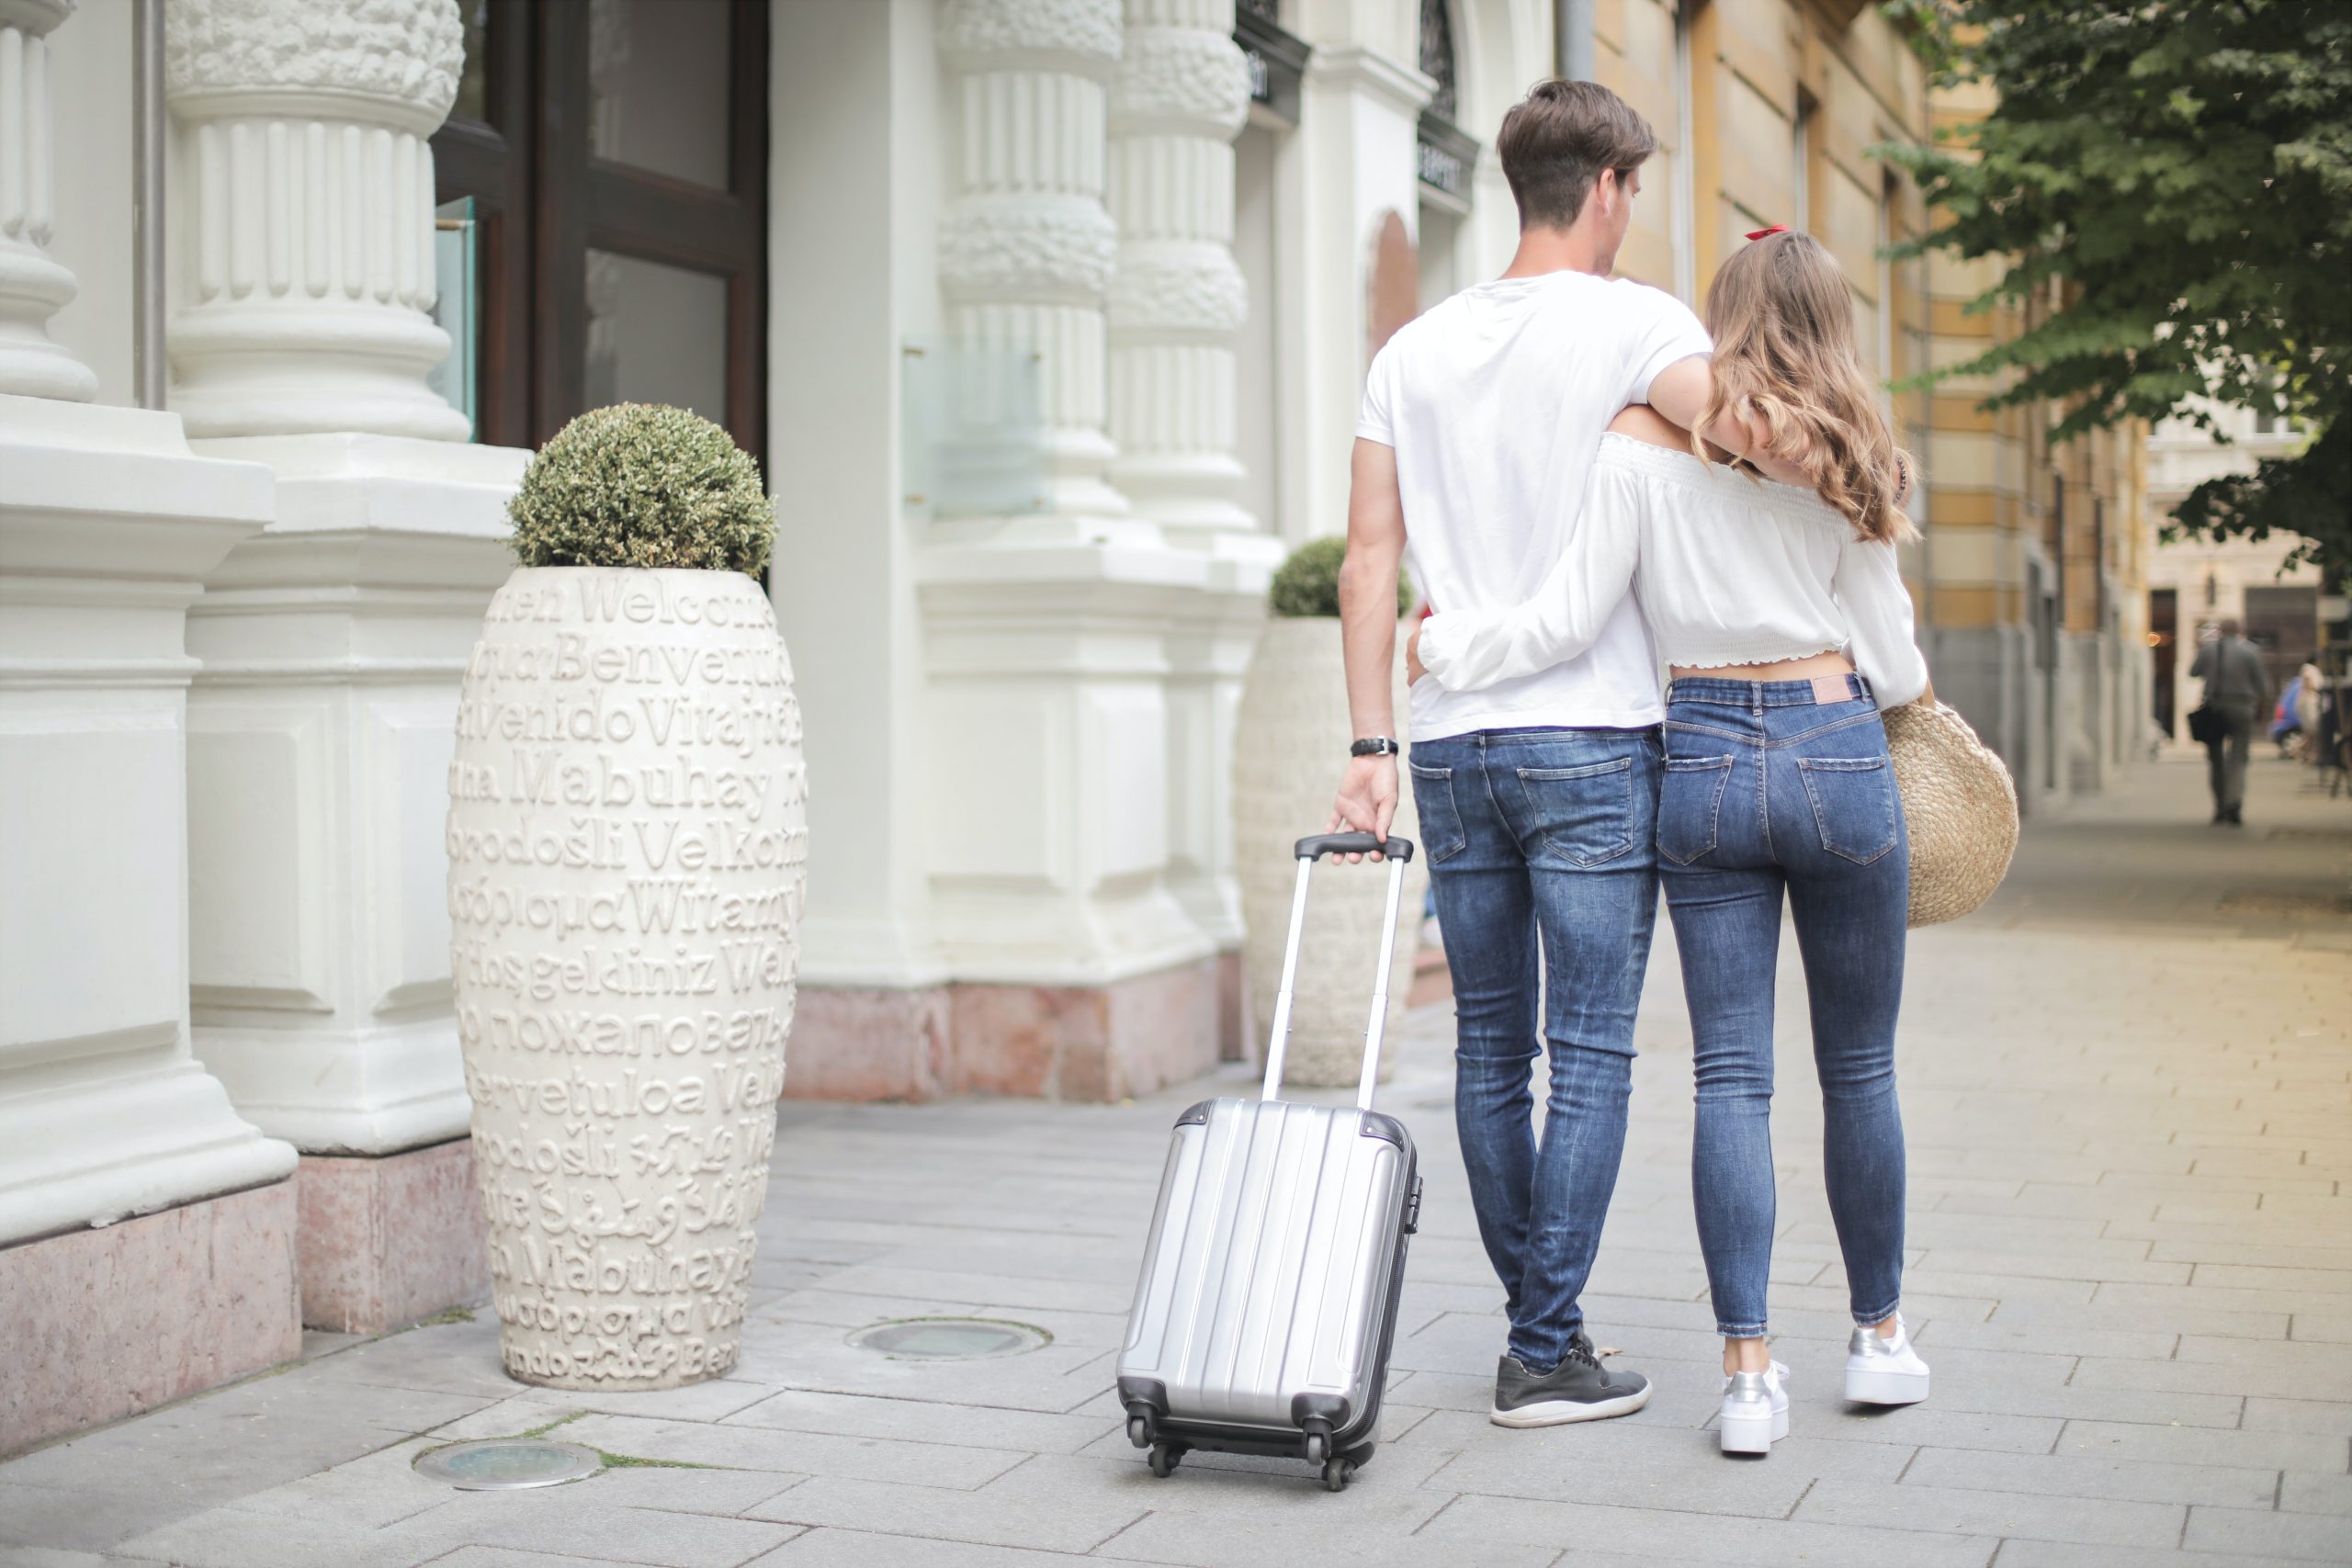 A young couple walk down the street with their luggage in tow.